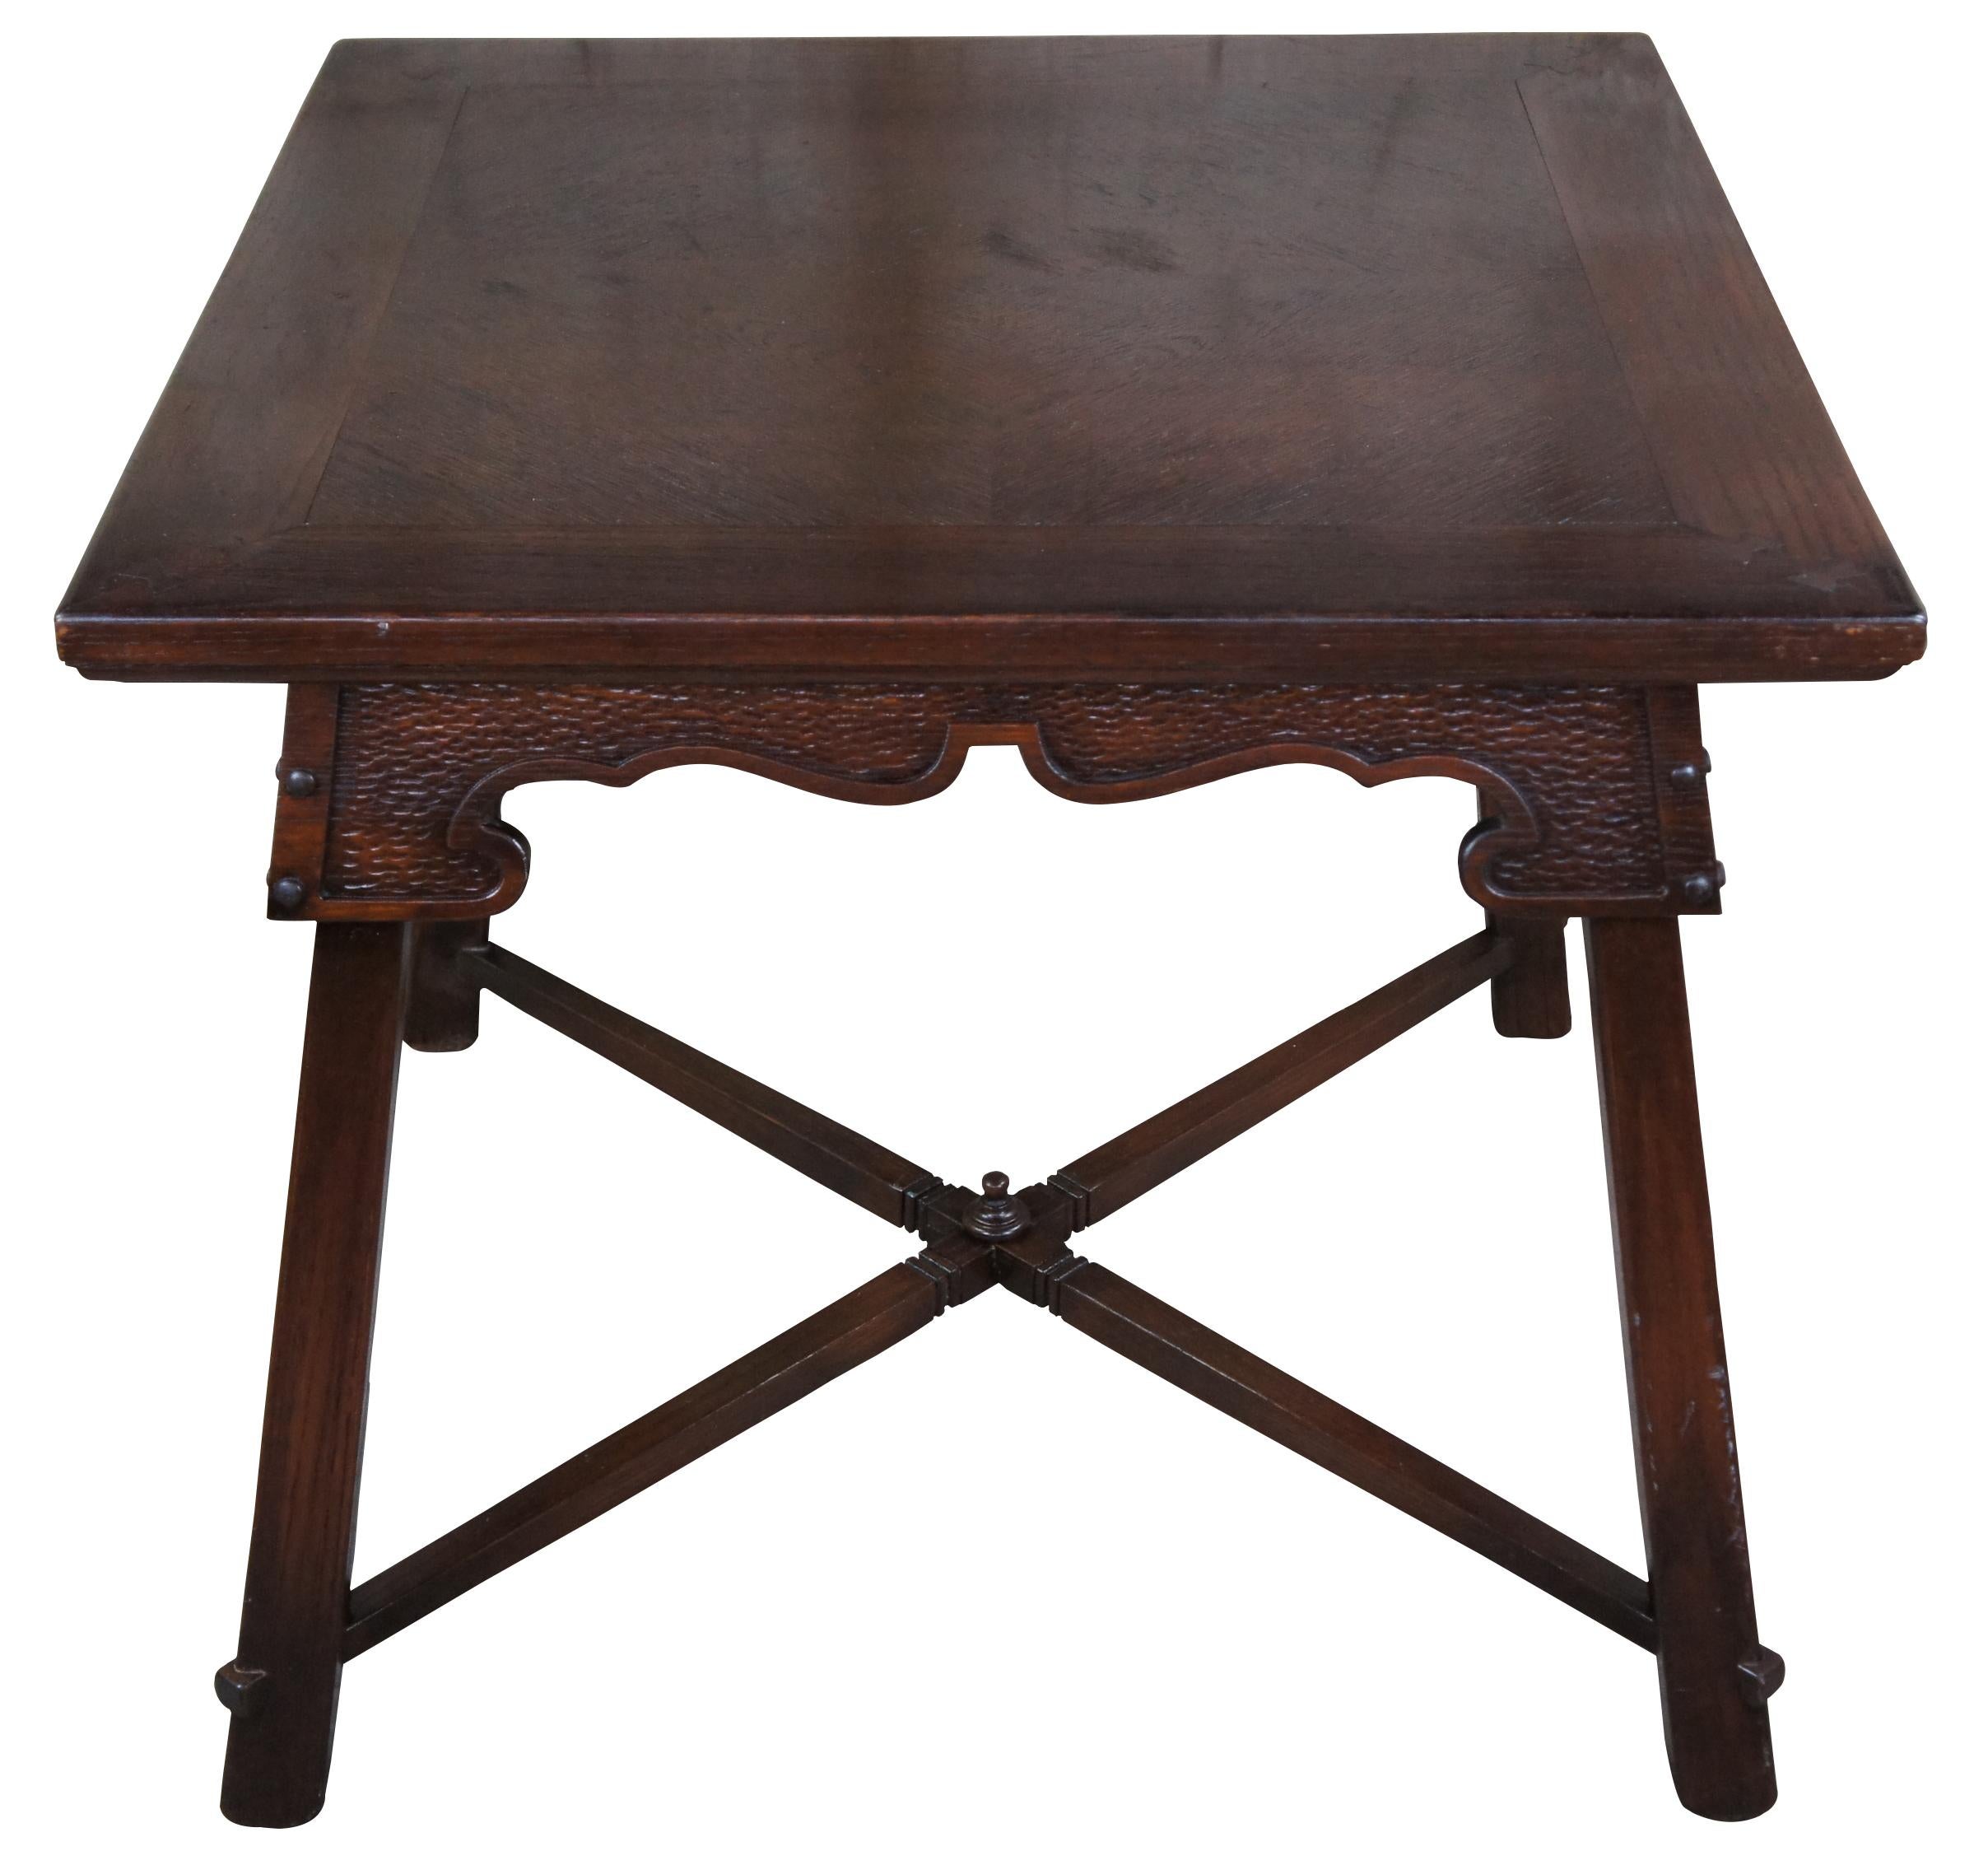 Vintage Romweber Viking oak square breakfast, dining or game table featuring square form with dovetailed accents, carved apron and X stretcher with finial. Measures: 34